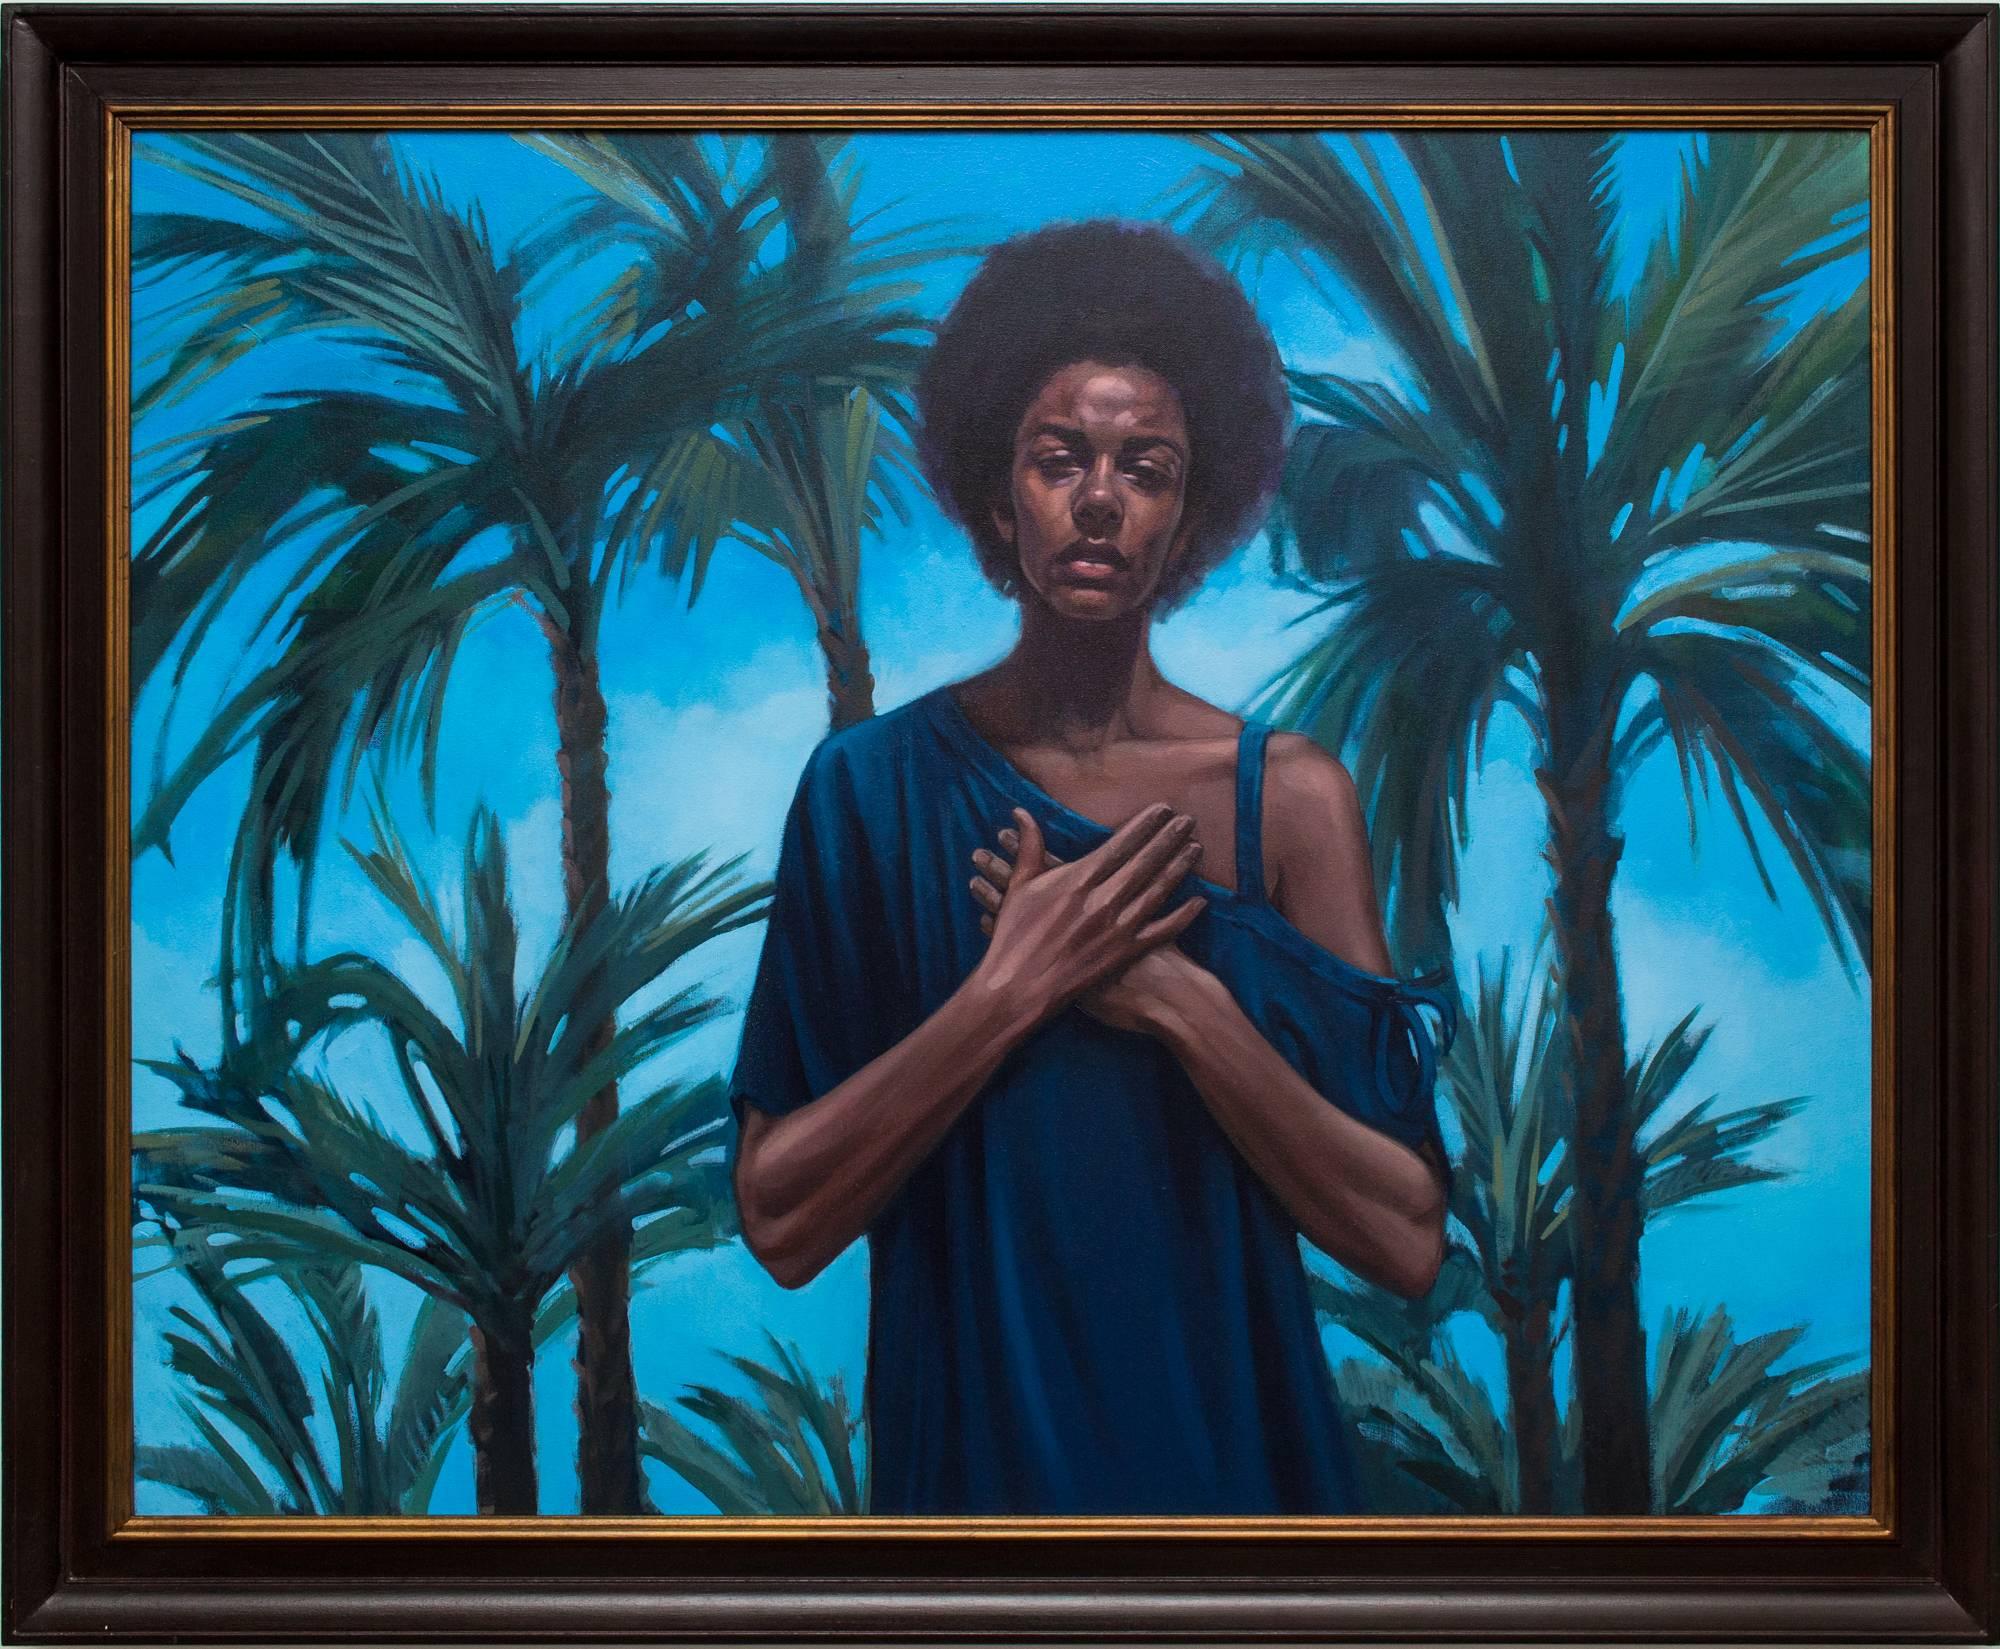 Katherine Fraser Portrait Painting - "Letter to the World" Hyper-realistic oil painting, woman and palm trees